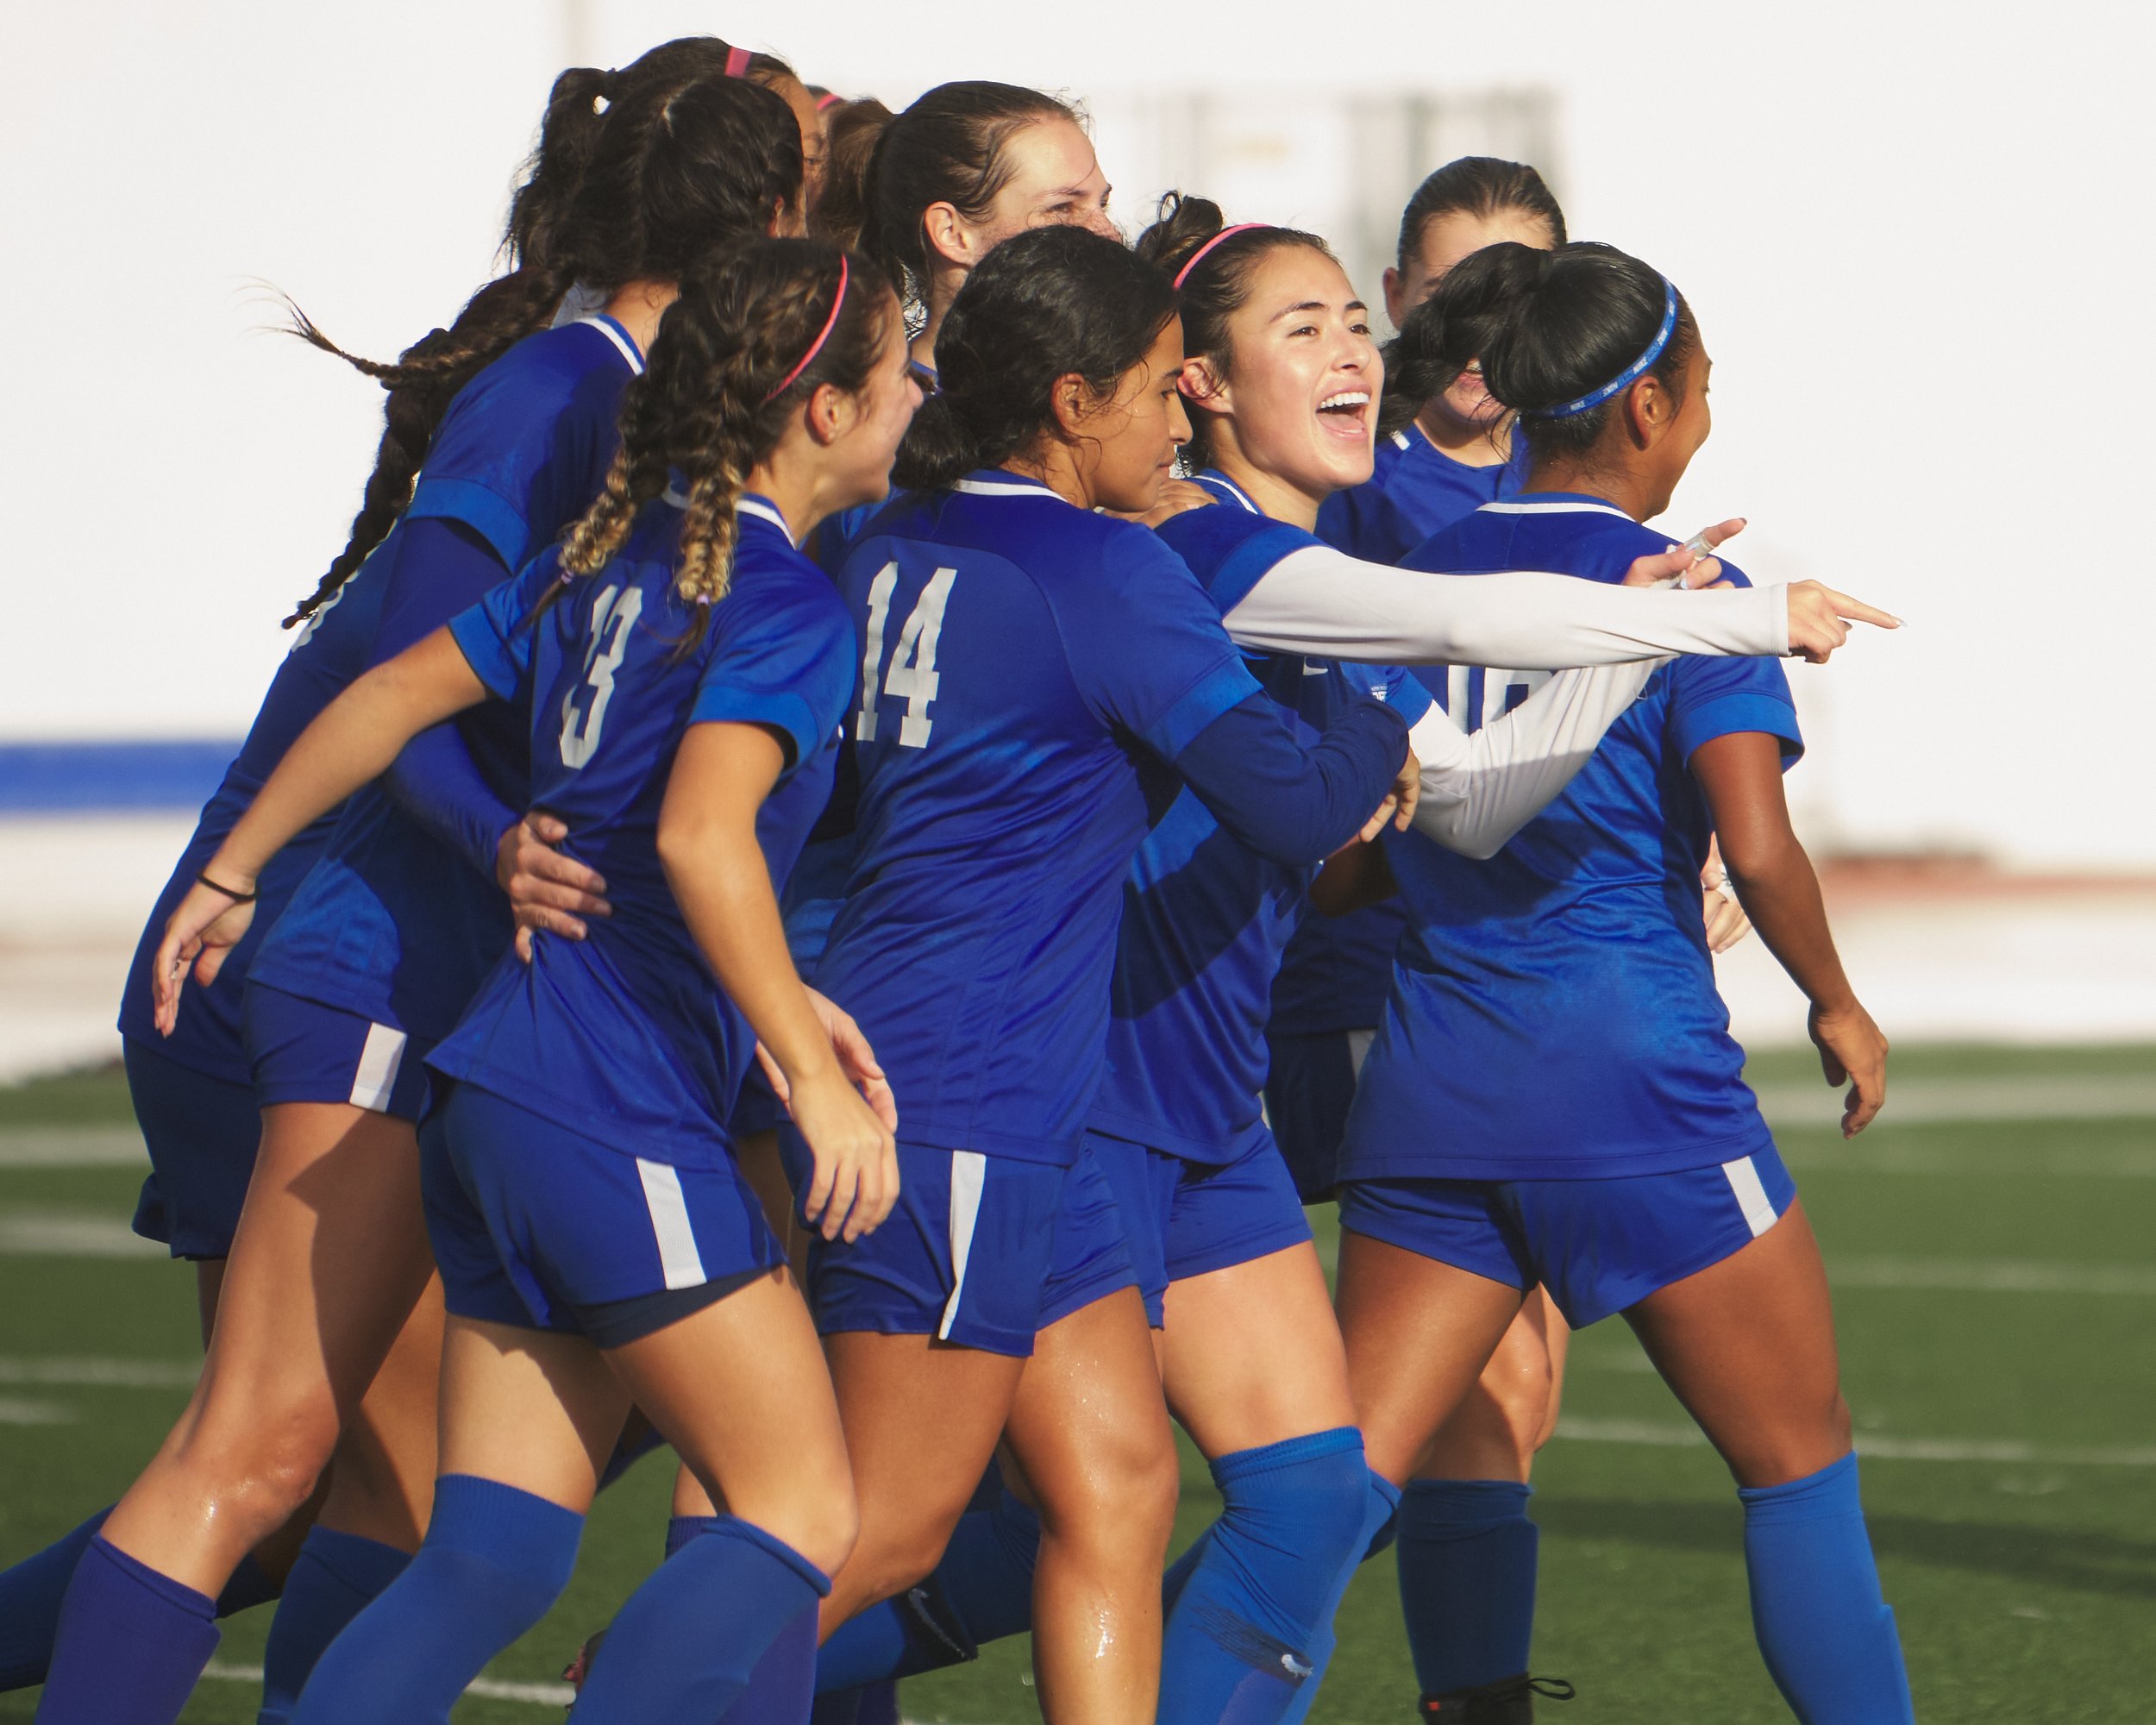  Members of the Santa Monica College Corsairs Women's Soccer team celebrate Ali Alban's (face visible) first goal of the women's soccer match against the Citrus College Owls on Tuesday, Nov. 8, 2022, at Corsair Field in Santa Monica, Calif. The Corsa